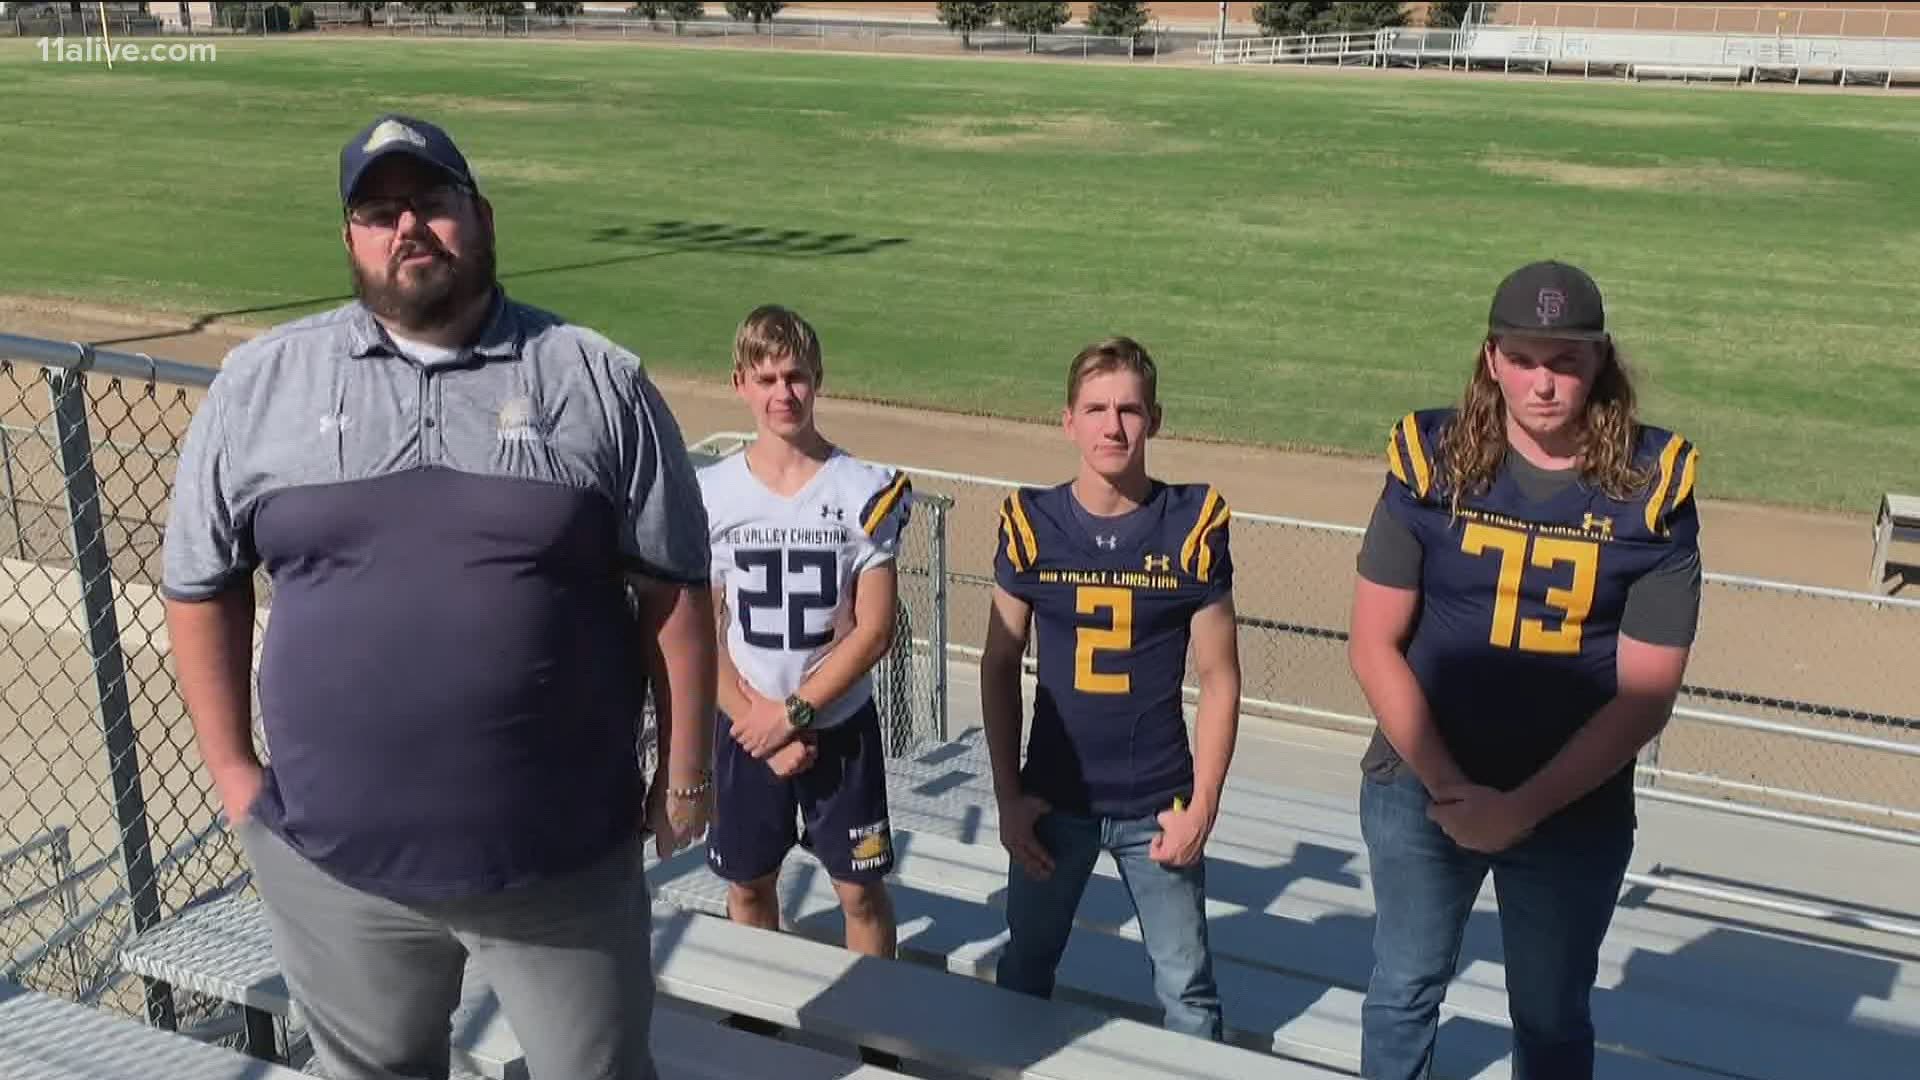 A local high school is thanking a team in California for unexpected words of encouragement.